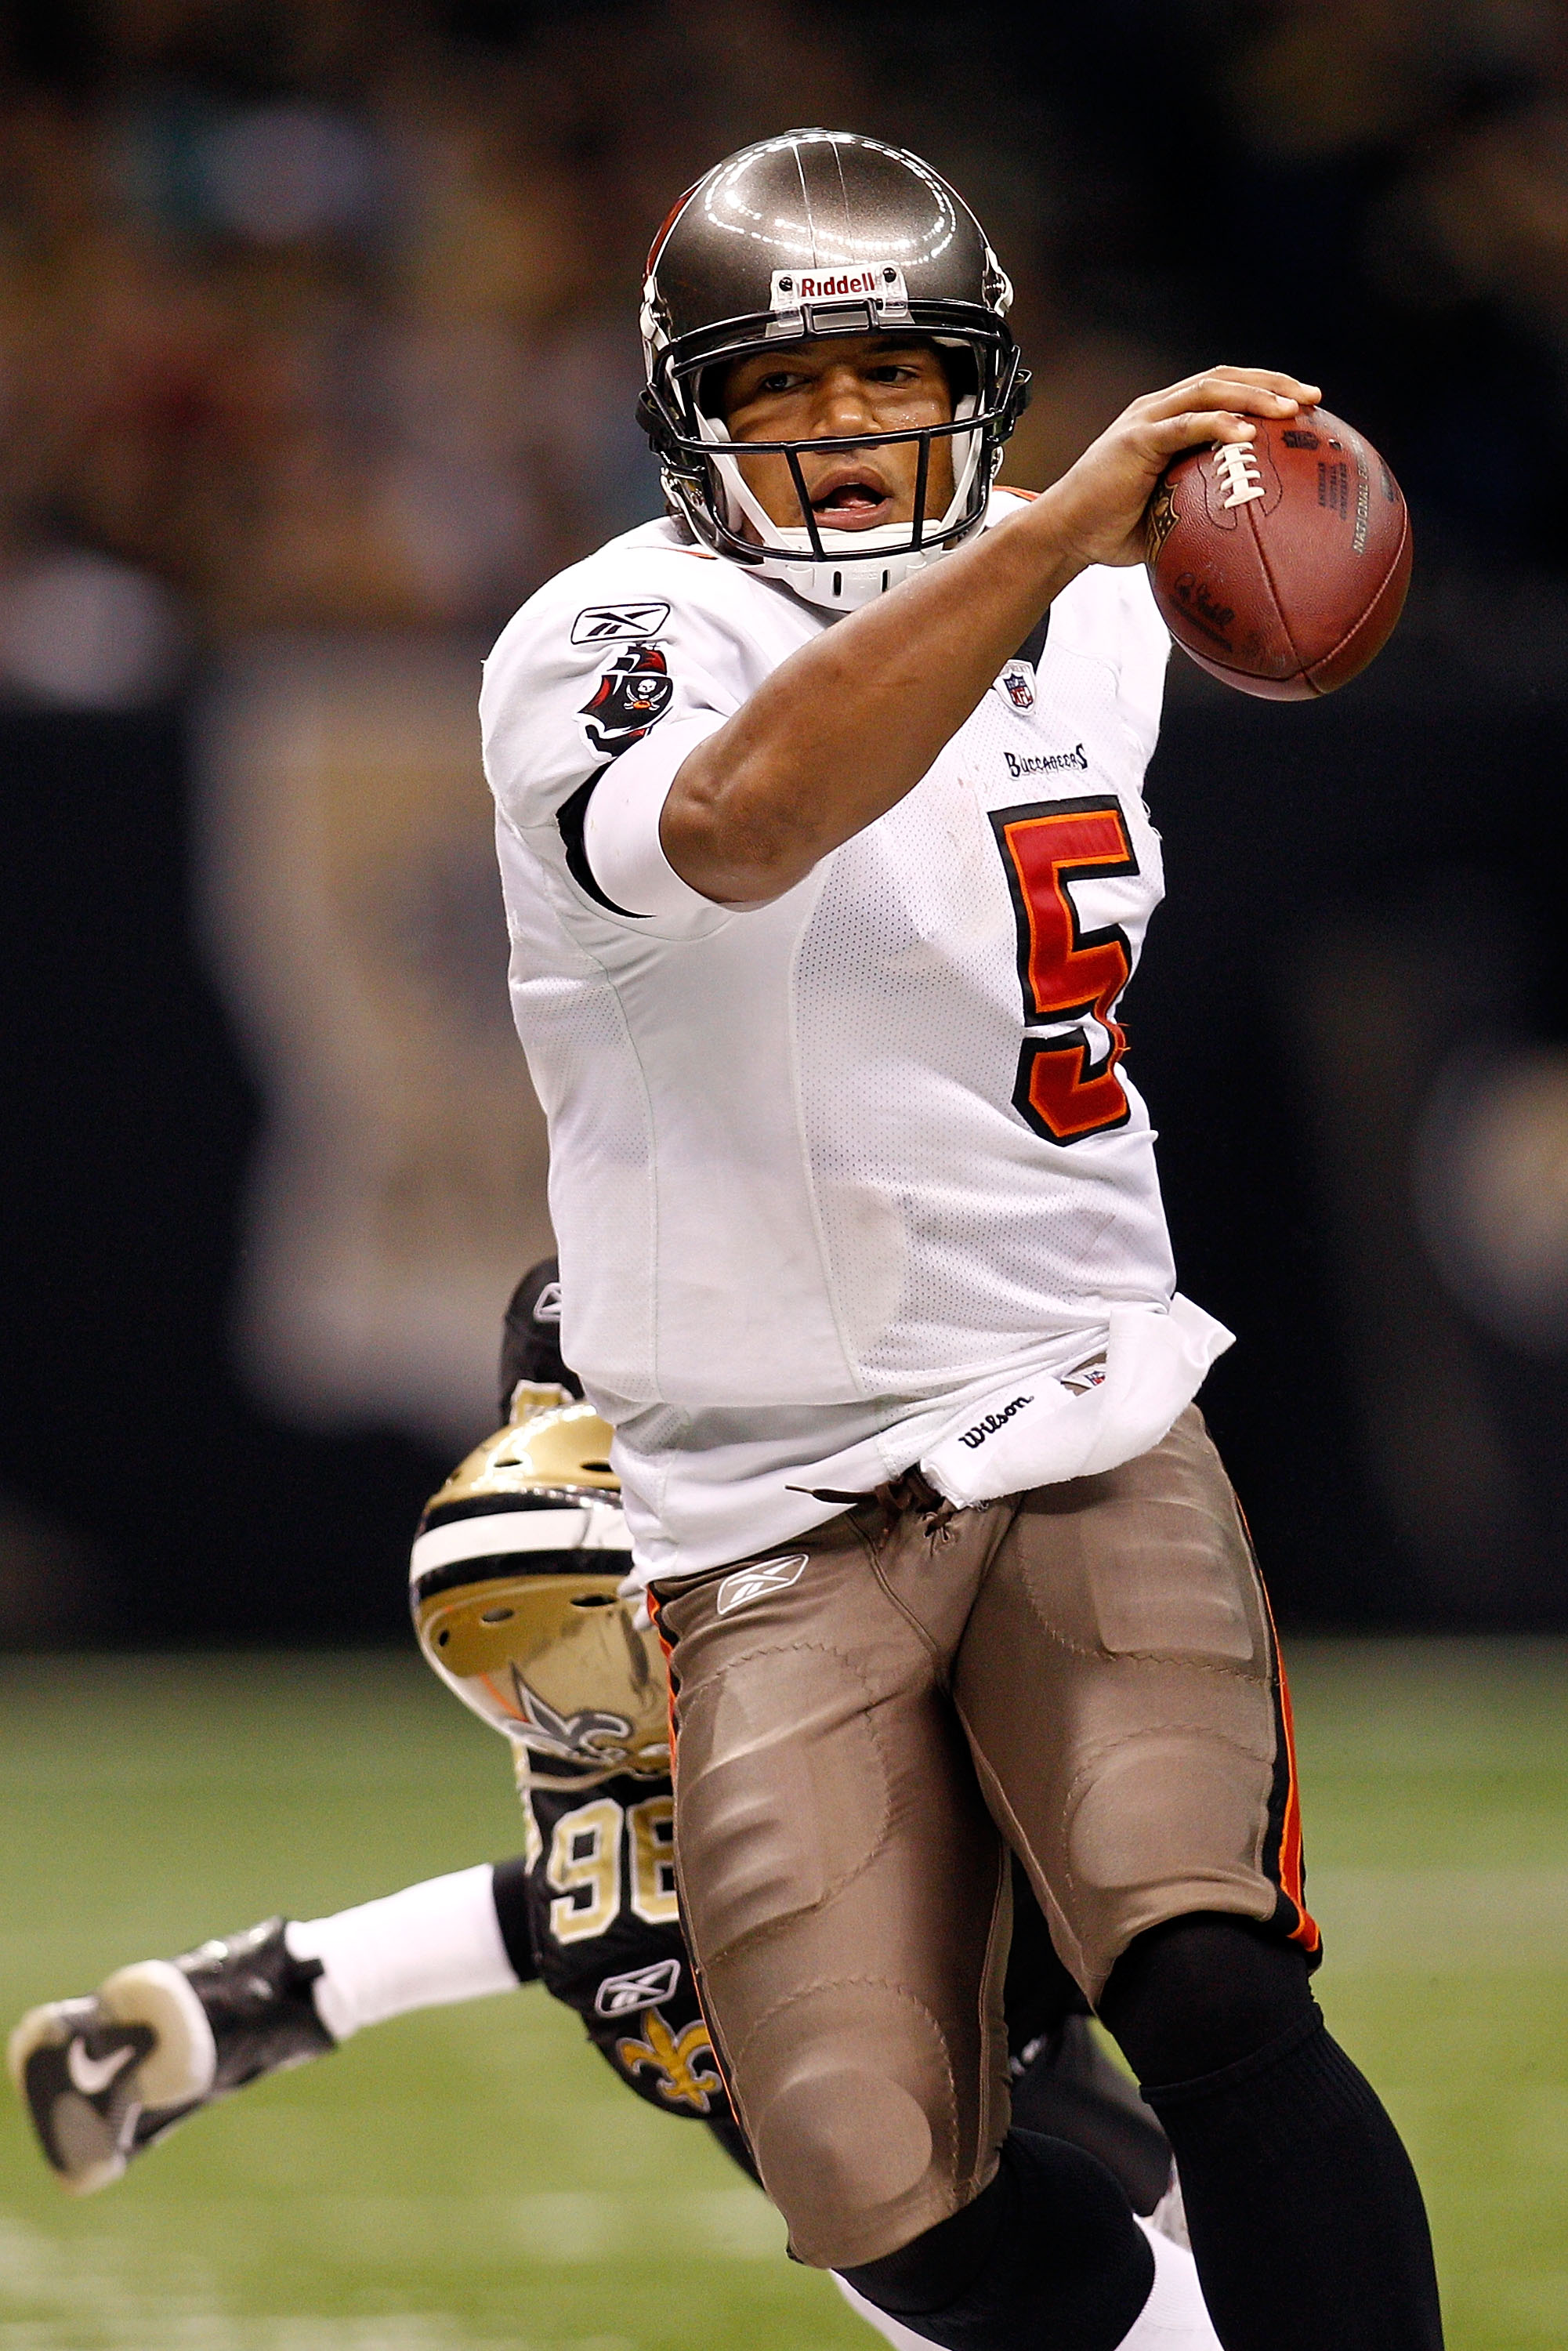 NEW ORLEANS, LA - JANUARY 02:  Quarterback Josh Freeman #5 of the Tampa Bay Buccaneers is pushed out of bounds by Alex Brown #96 of the New Orleans Saints at the Louisiana Superdome on January 2, 2011 in New Orleans, Louisiana.  The Buccaneers defeated th